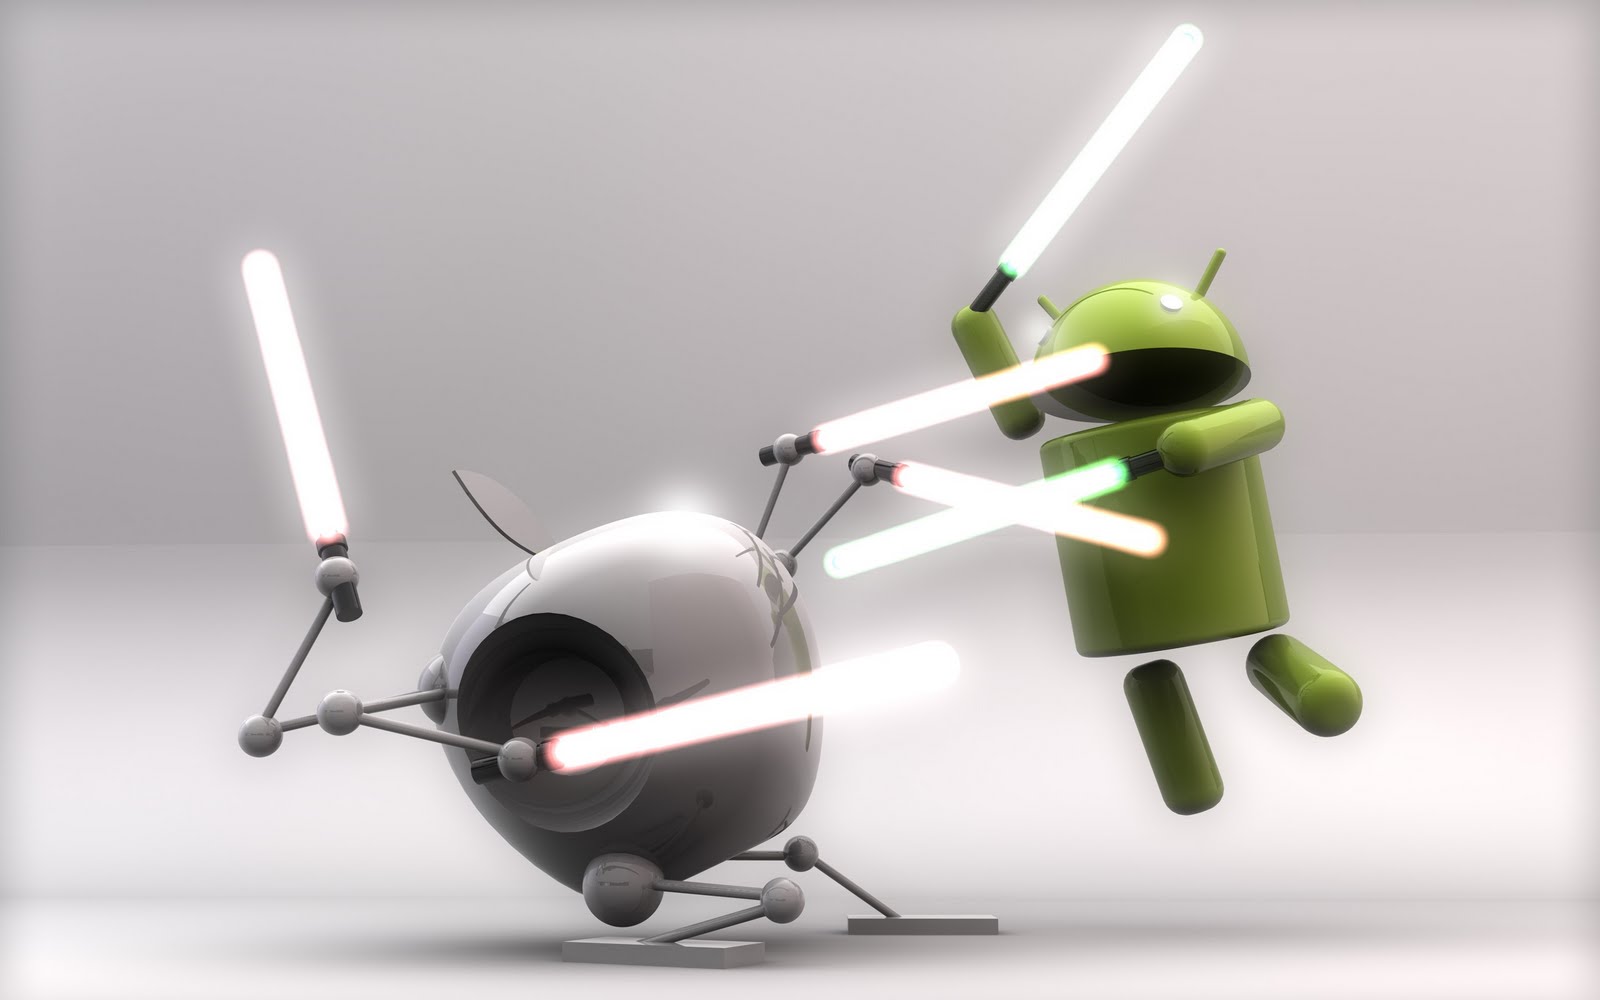 iOs vs Android App Development – Where Should Your App Start?